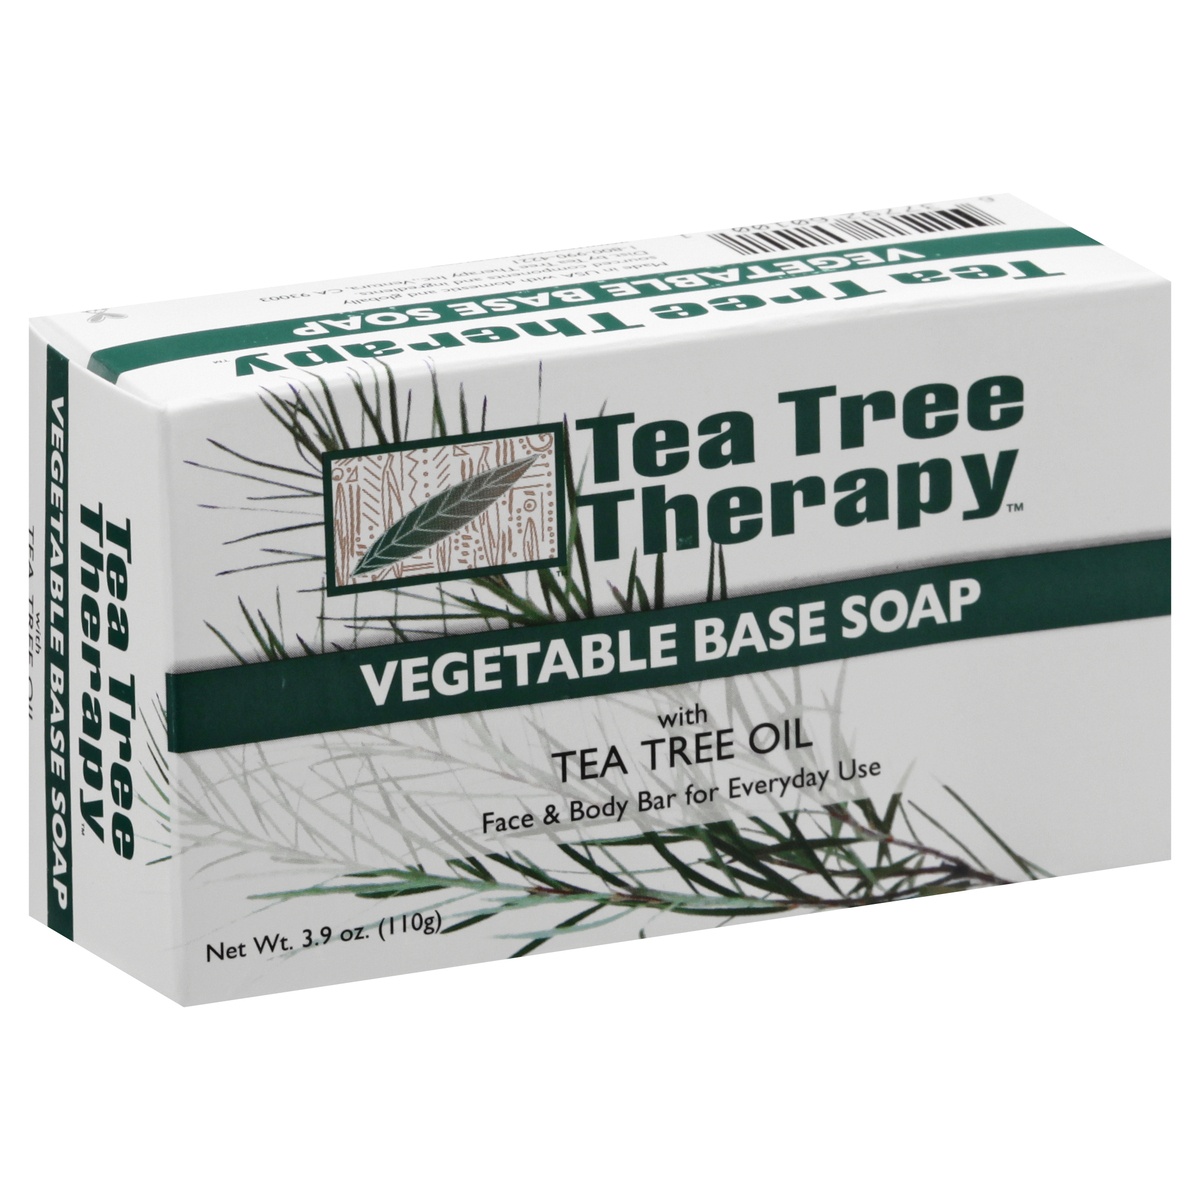 slide 2 of 9, Tea Tree Therapy Vegetable Base Soap with Tea Tree Oil, 3.9 oz